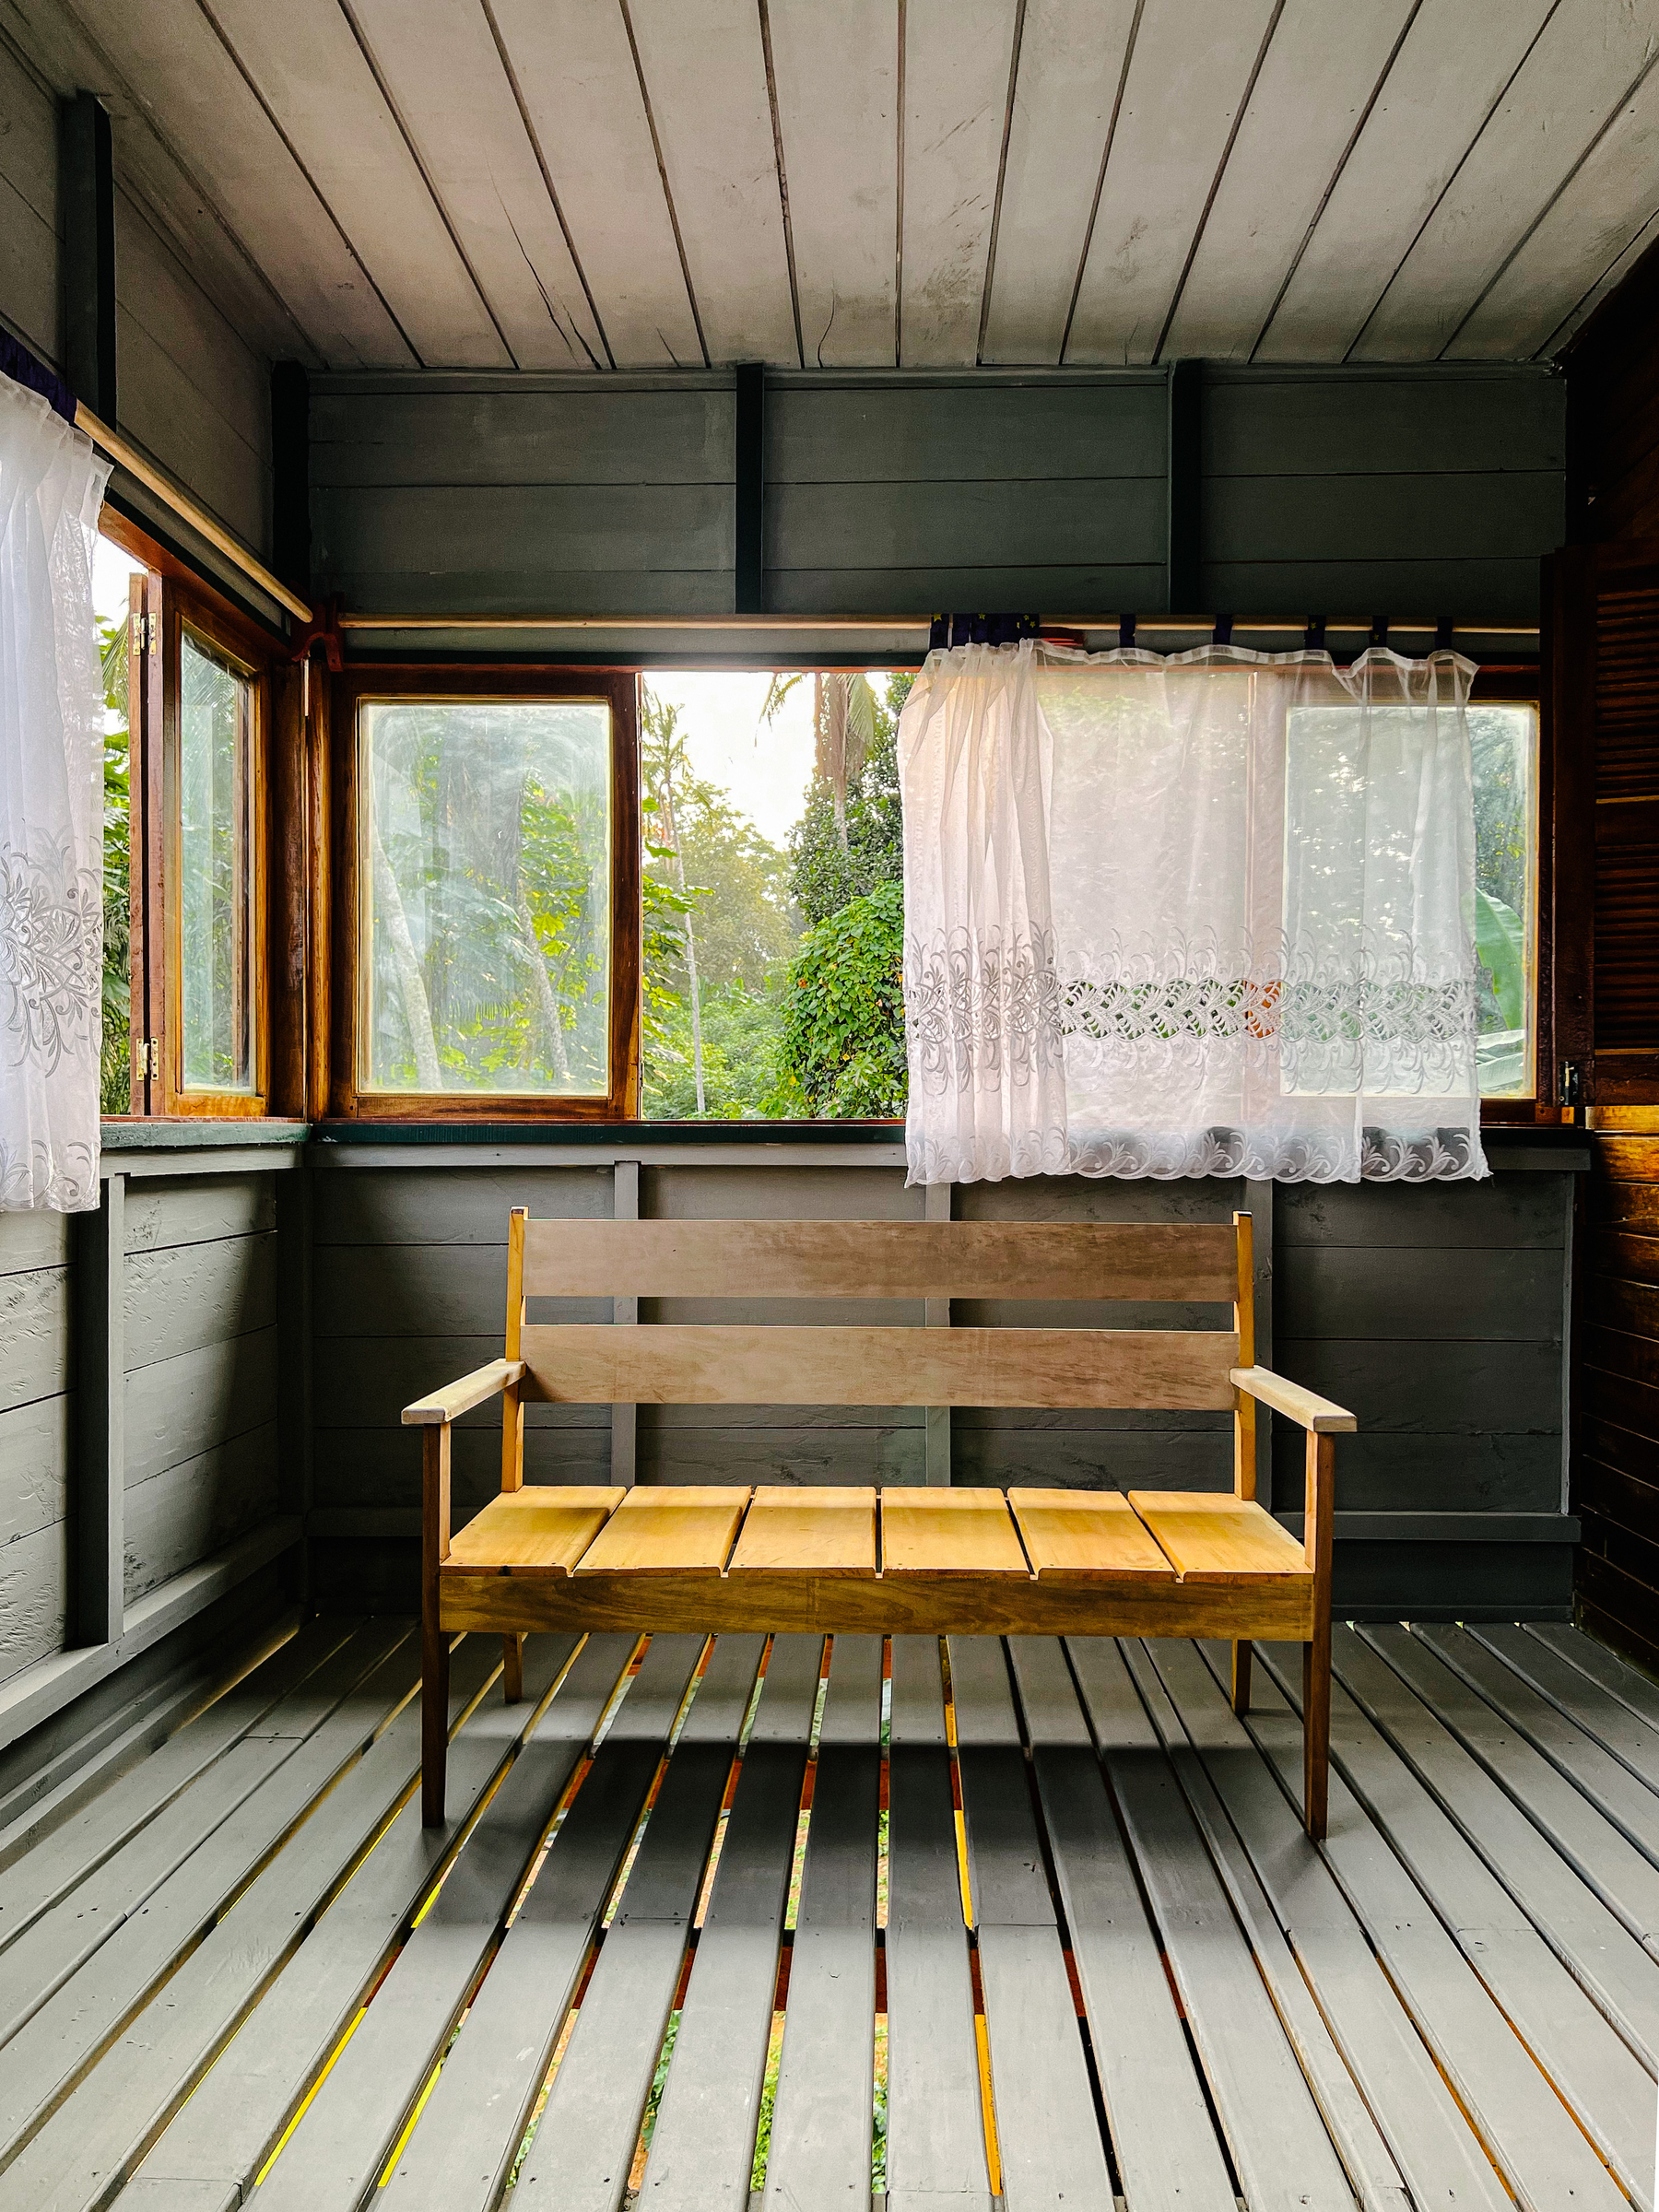 A simple room, all made of wood, with a bench and windows looking out to the rainforest. 